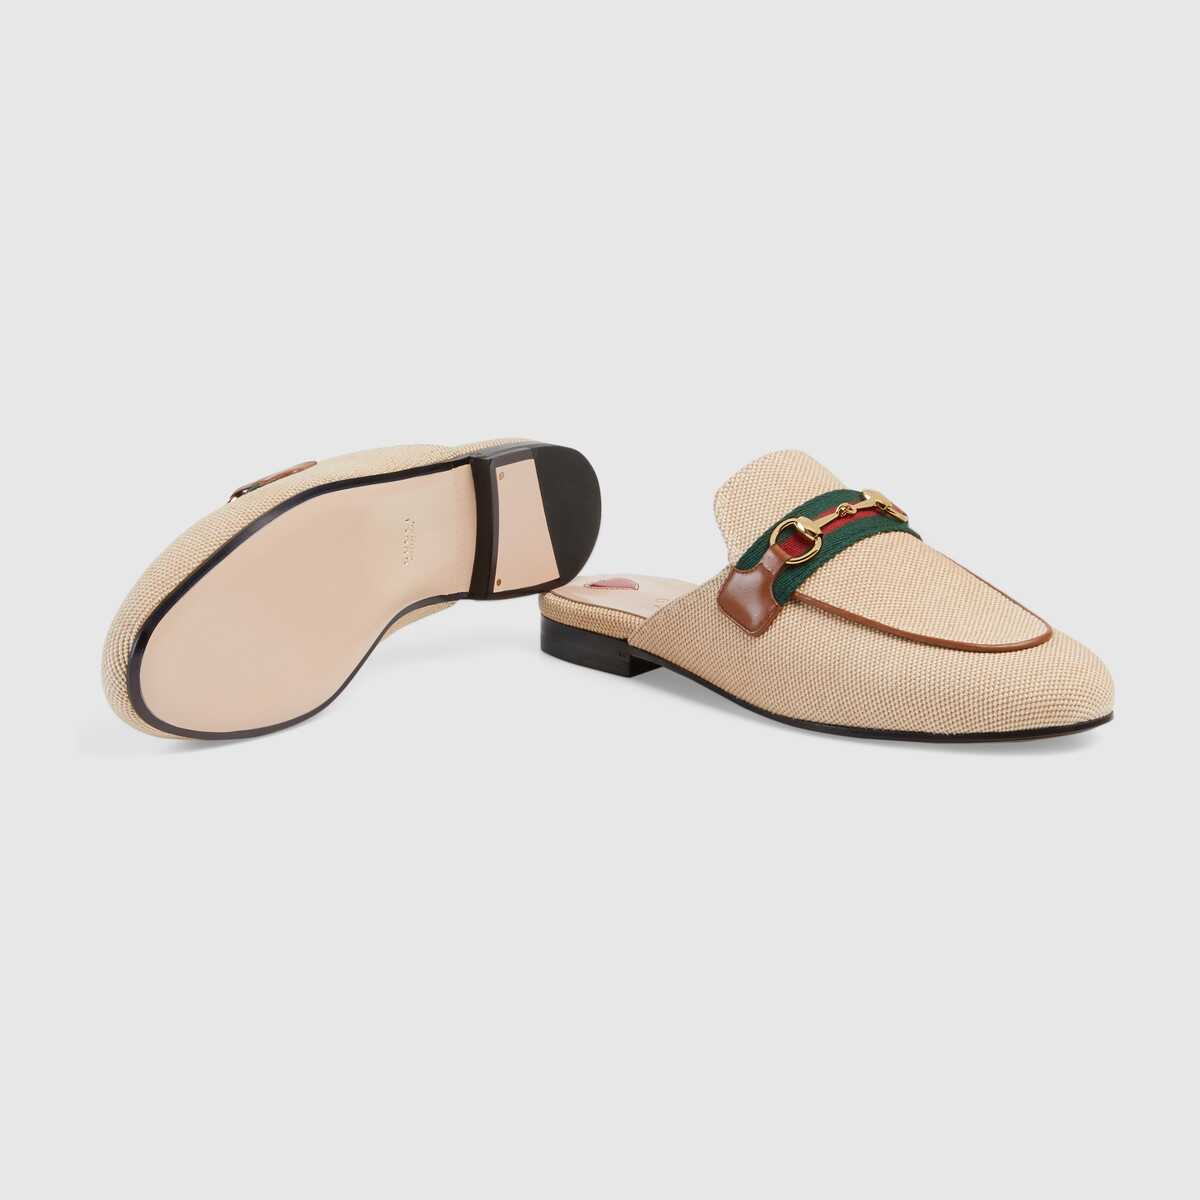 Gucci Online Exclusive womens Princetown canvas slipper GG1520BL-2